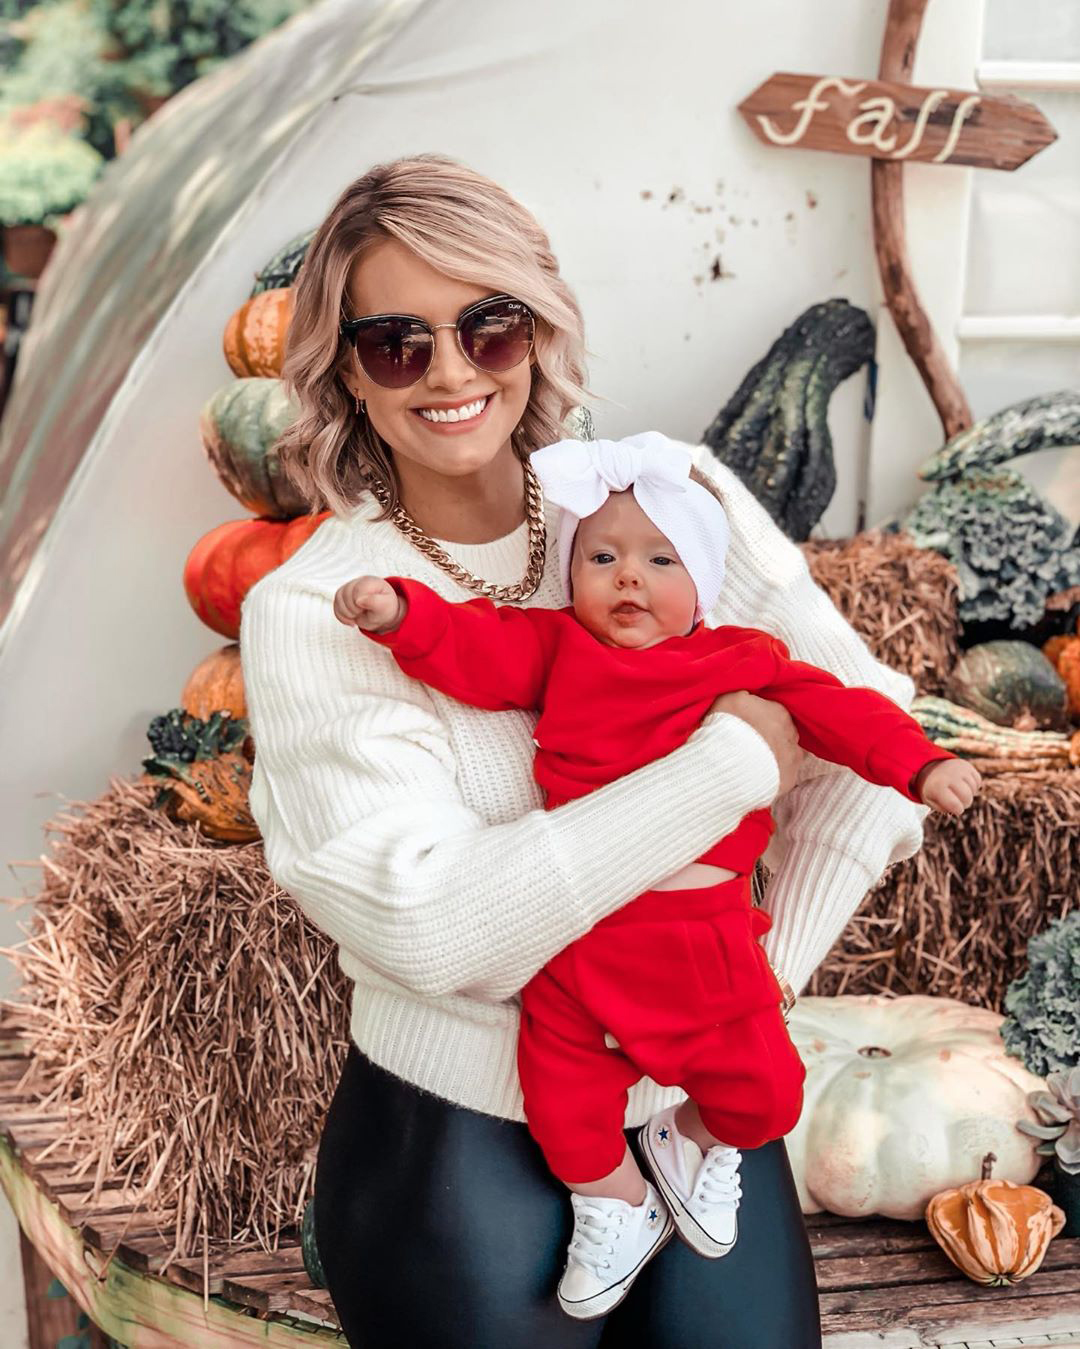 Celebrity Parents Visiting Pumpkin Patches With Their Kids in Fall 2020: Pics